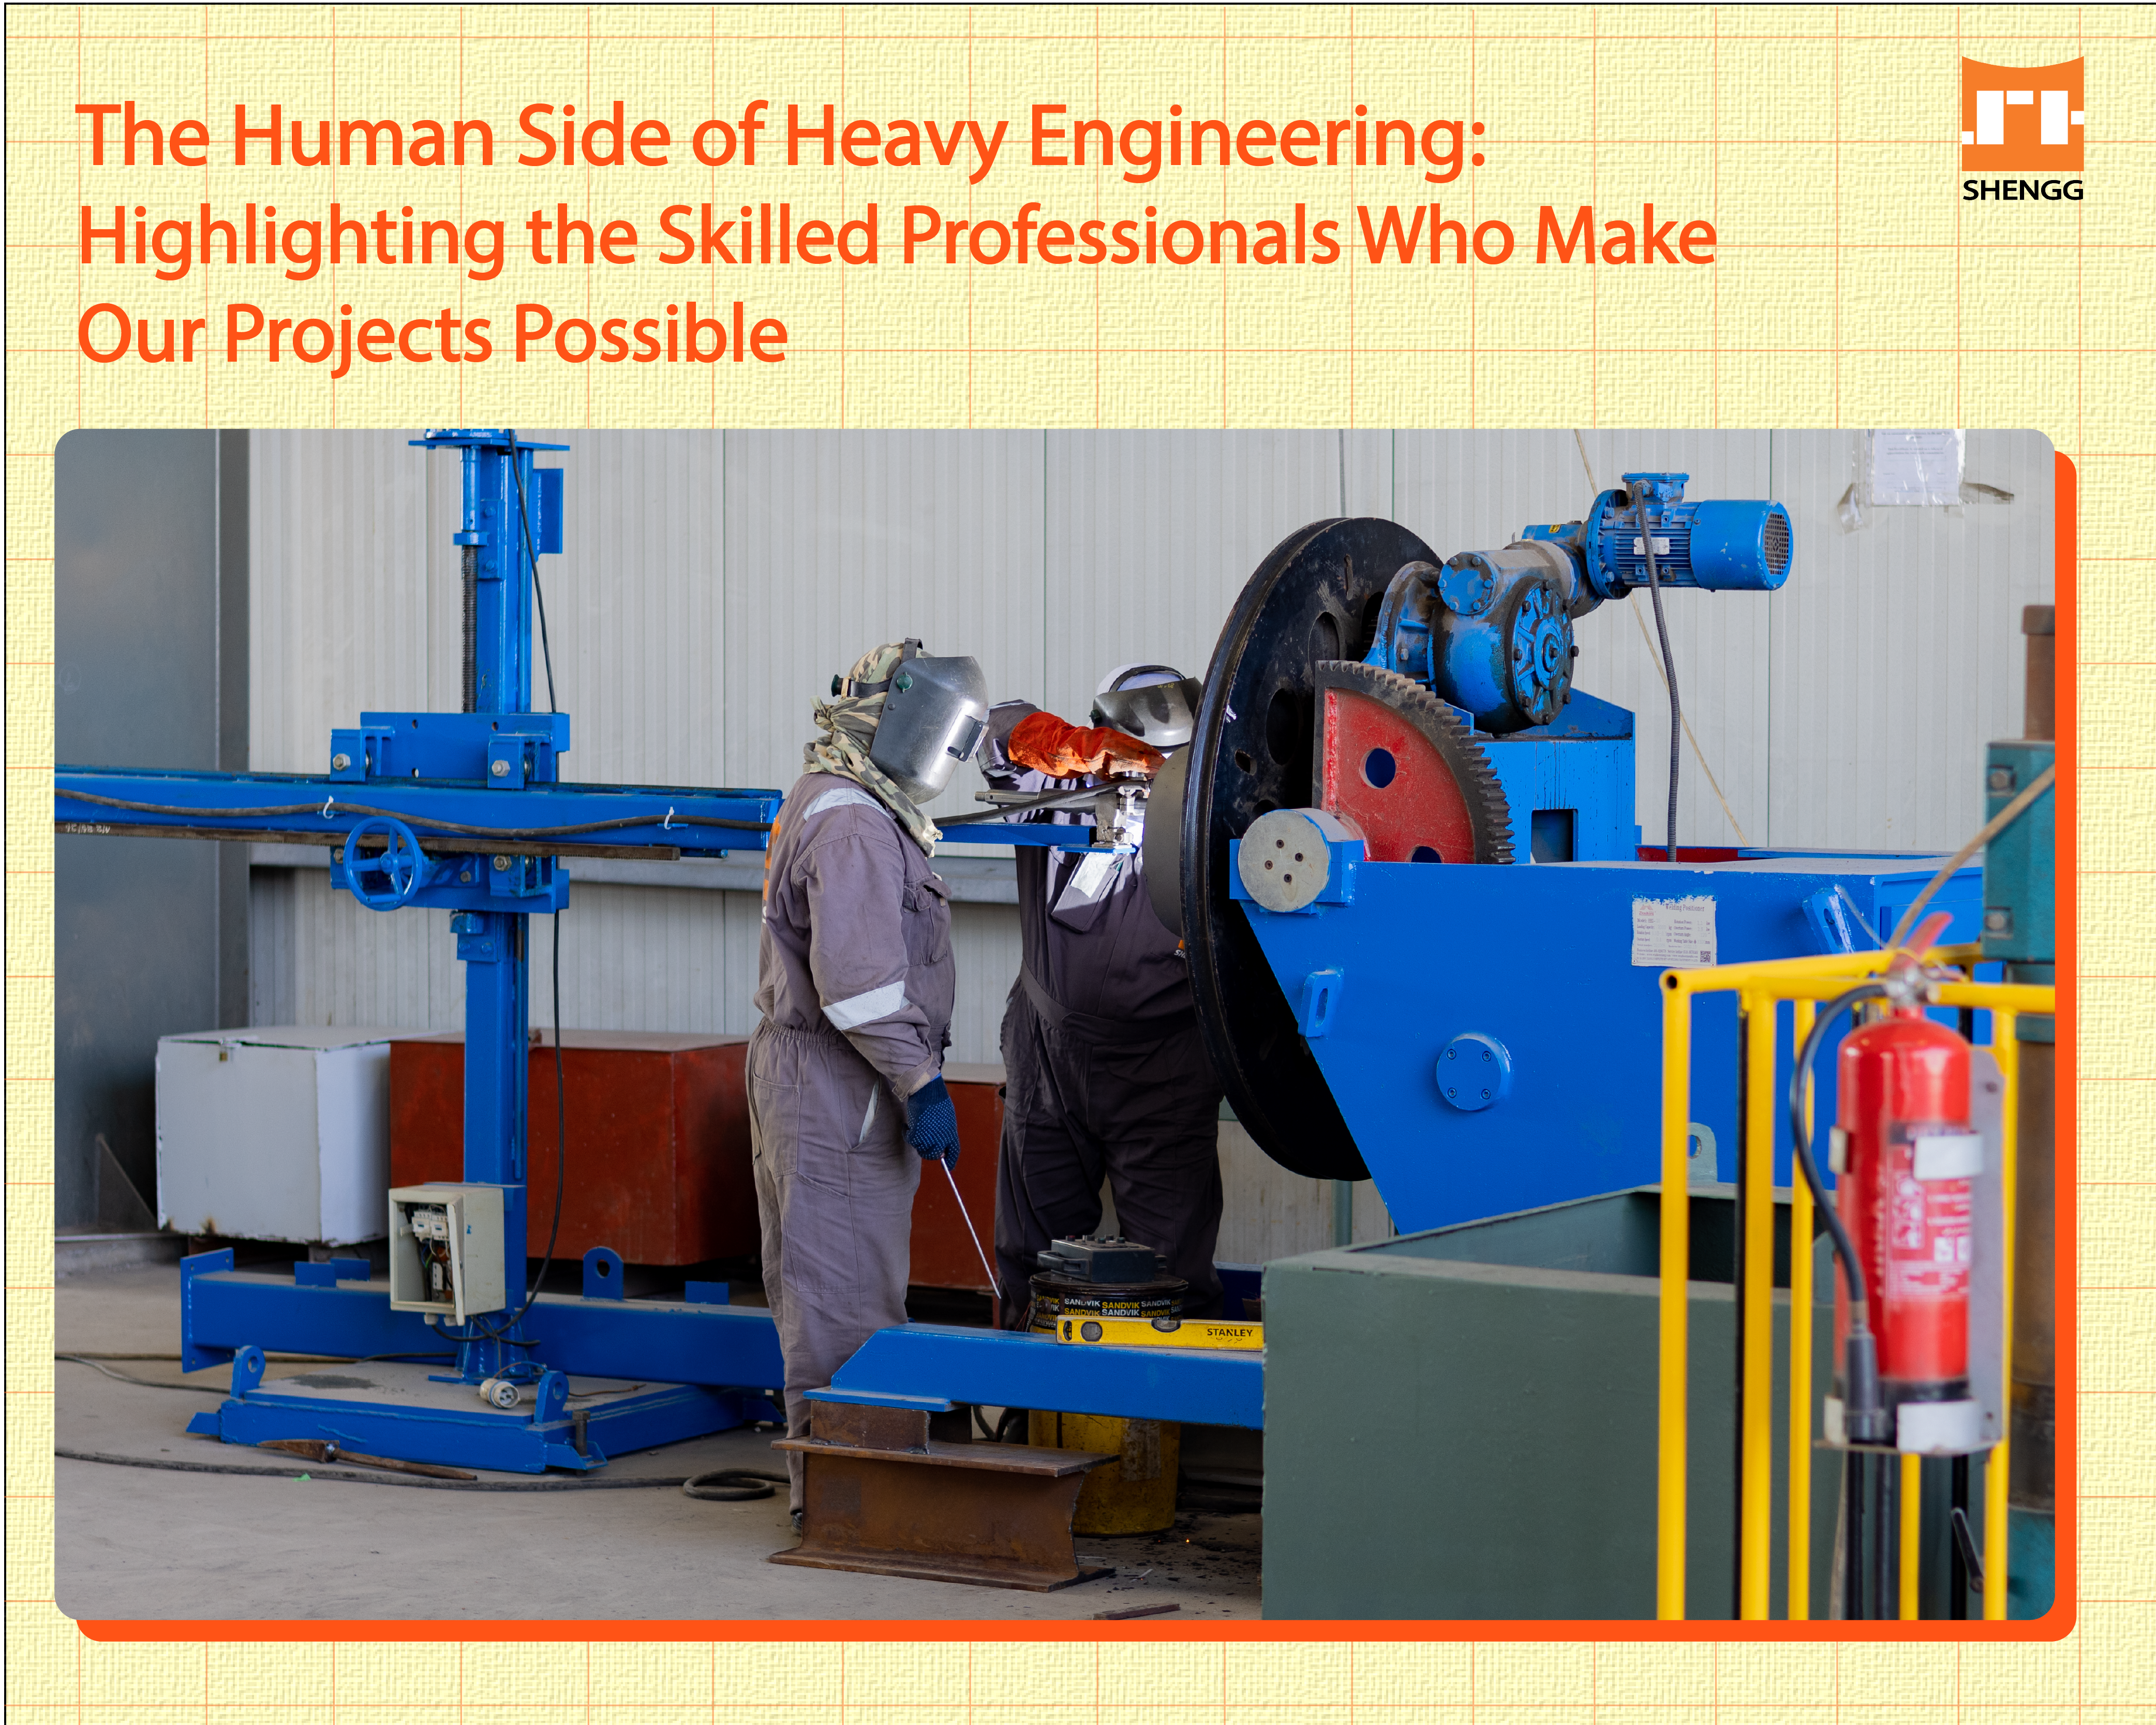 The Human Side of Heavy Engineering: Skilled Professionals Who Make Our Projects Possible